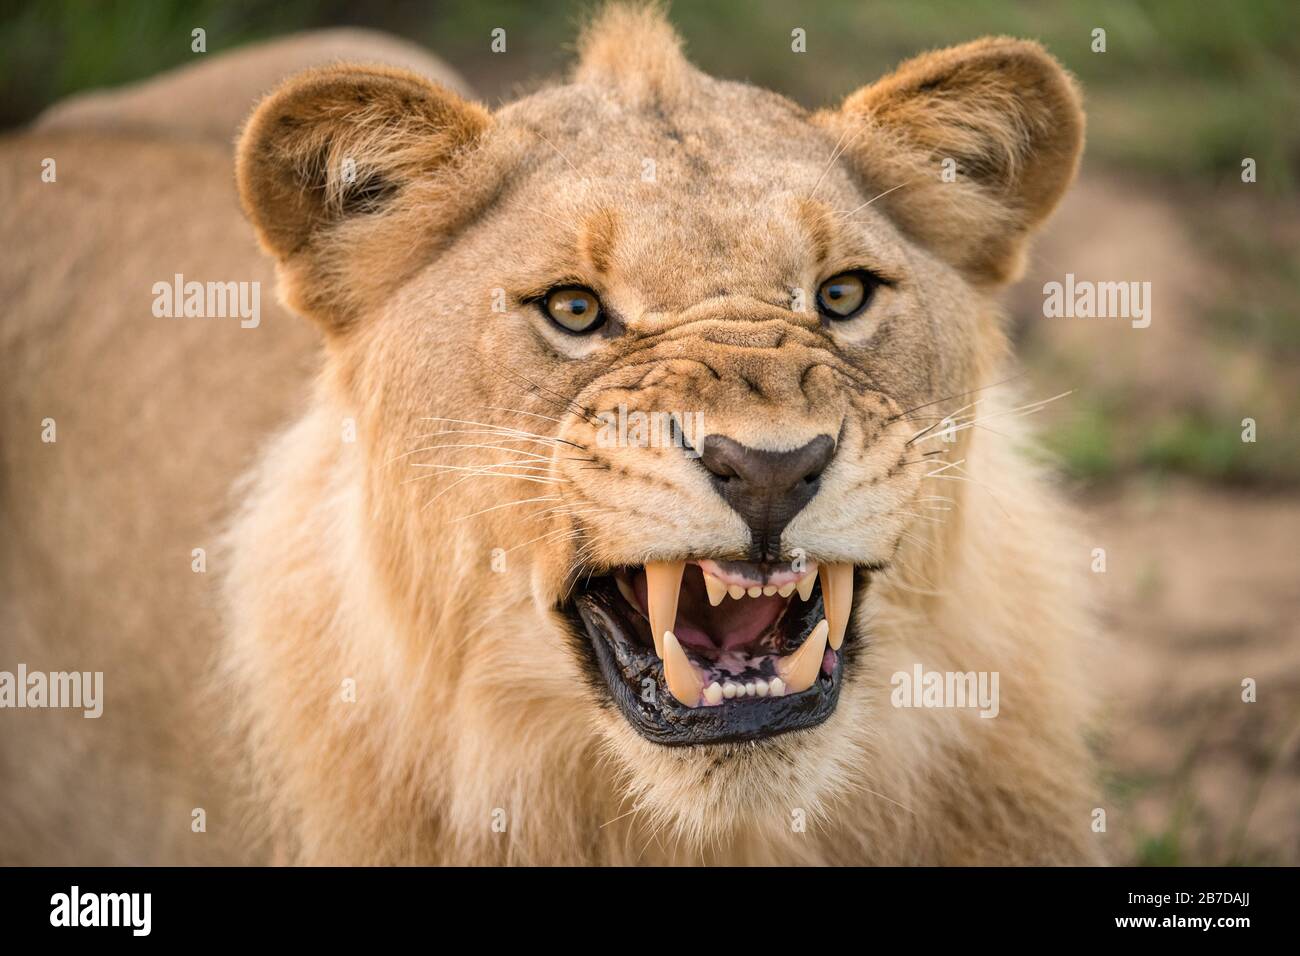 A dramatic close up of a snarling lioness, baring her teeth and canines, taken in the madikwe game Reserve, South Africa. Stock Photo